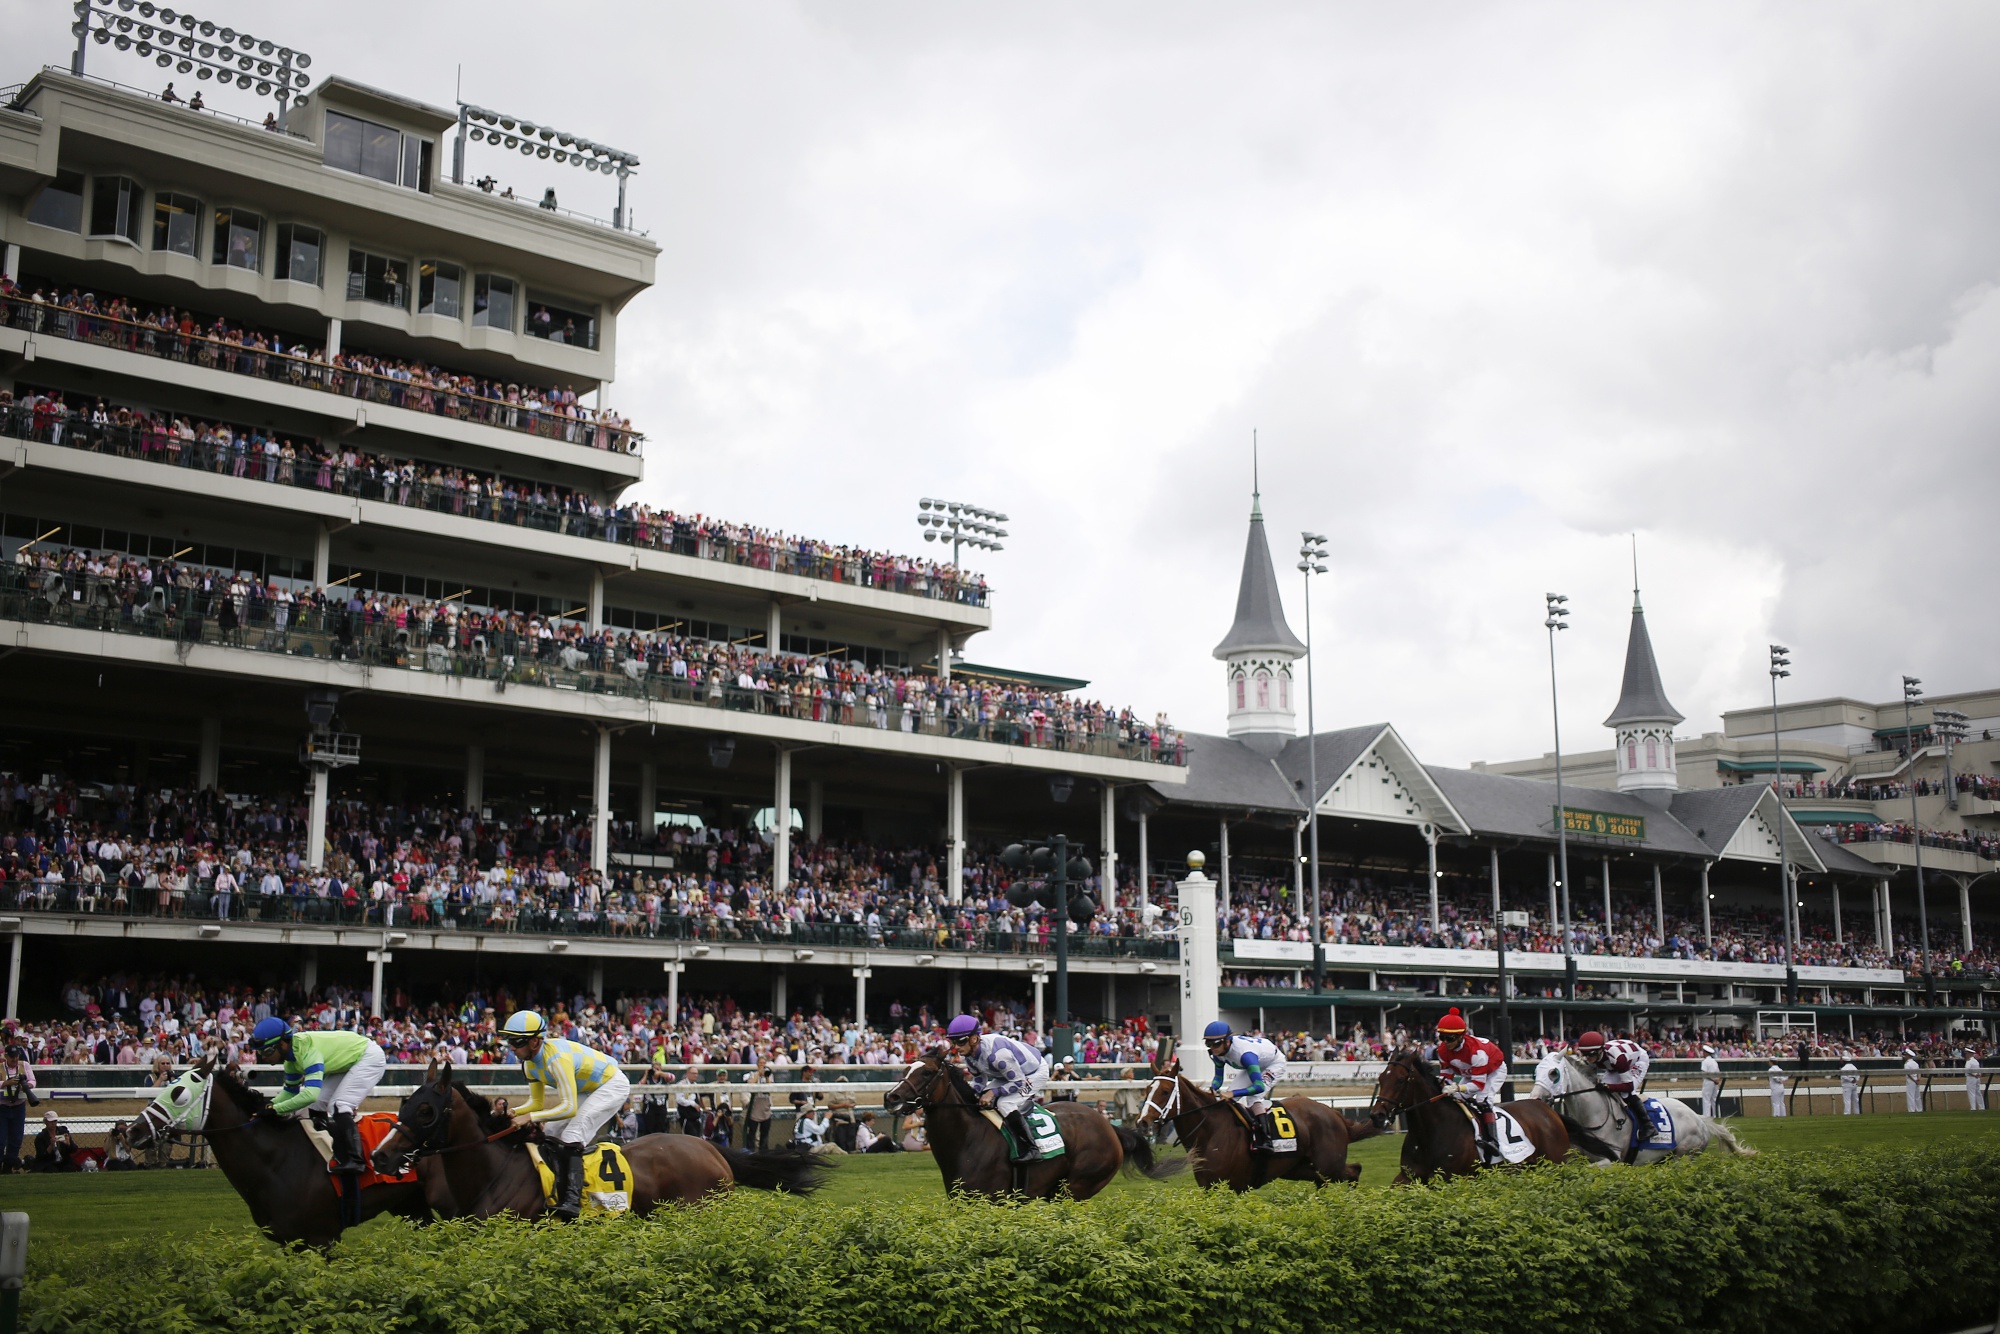 Thoroughbred racehorses compete in a turf race ahead of the 145th running of the Kentucky Derby at Churchill Downs in Louisville, Kentucky in 2019.